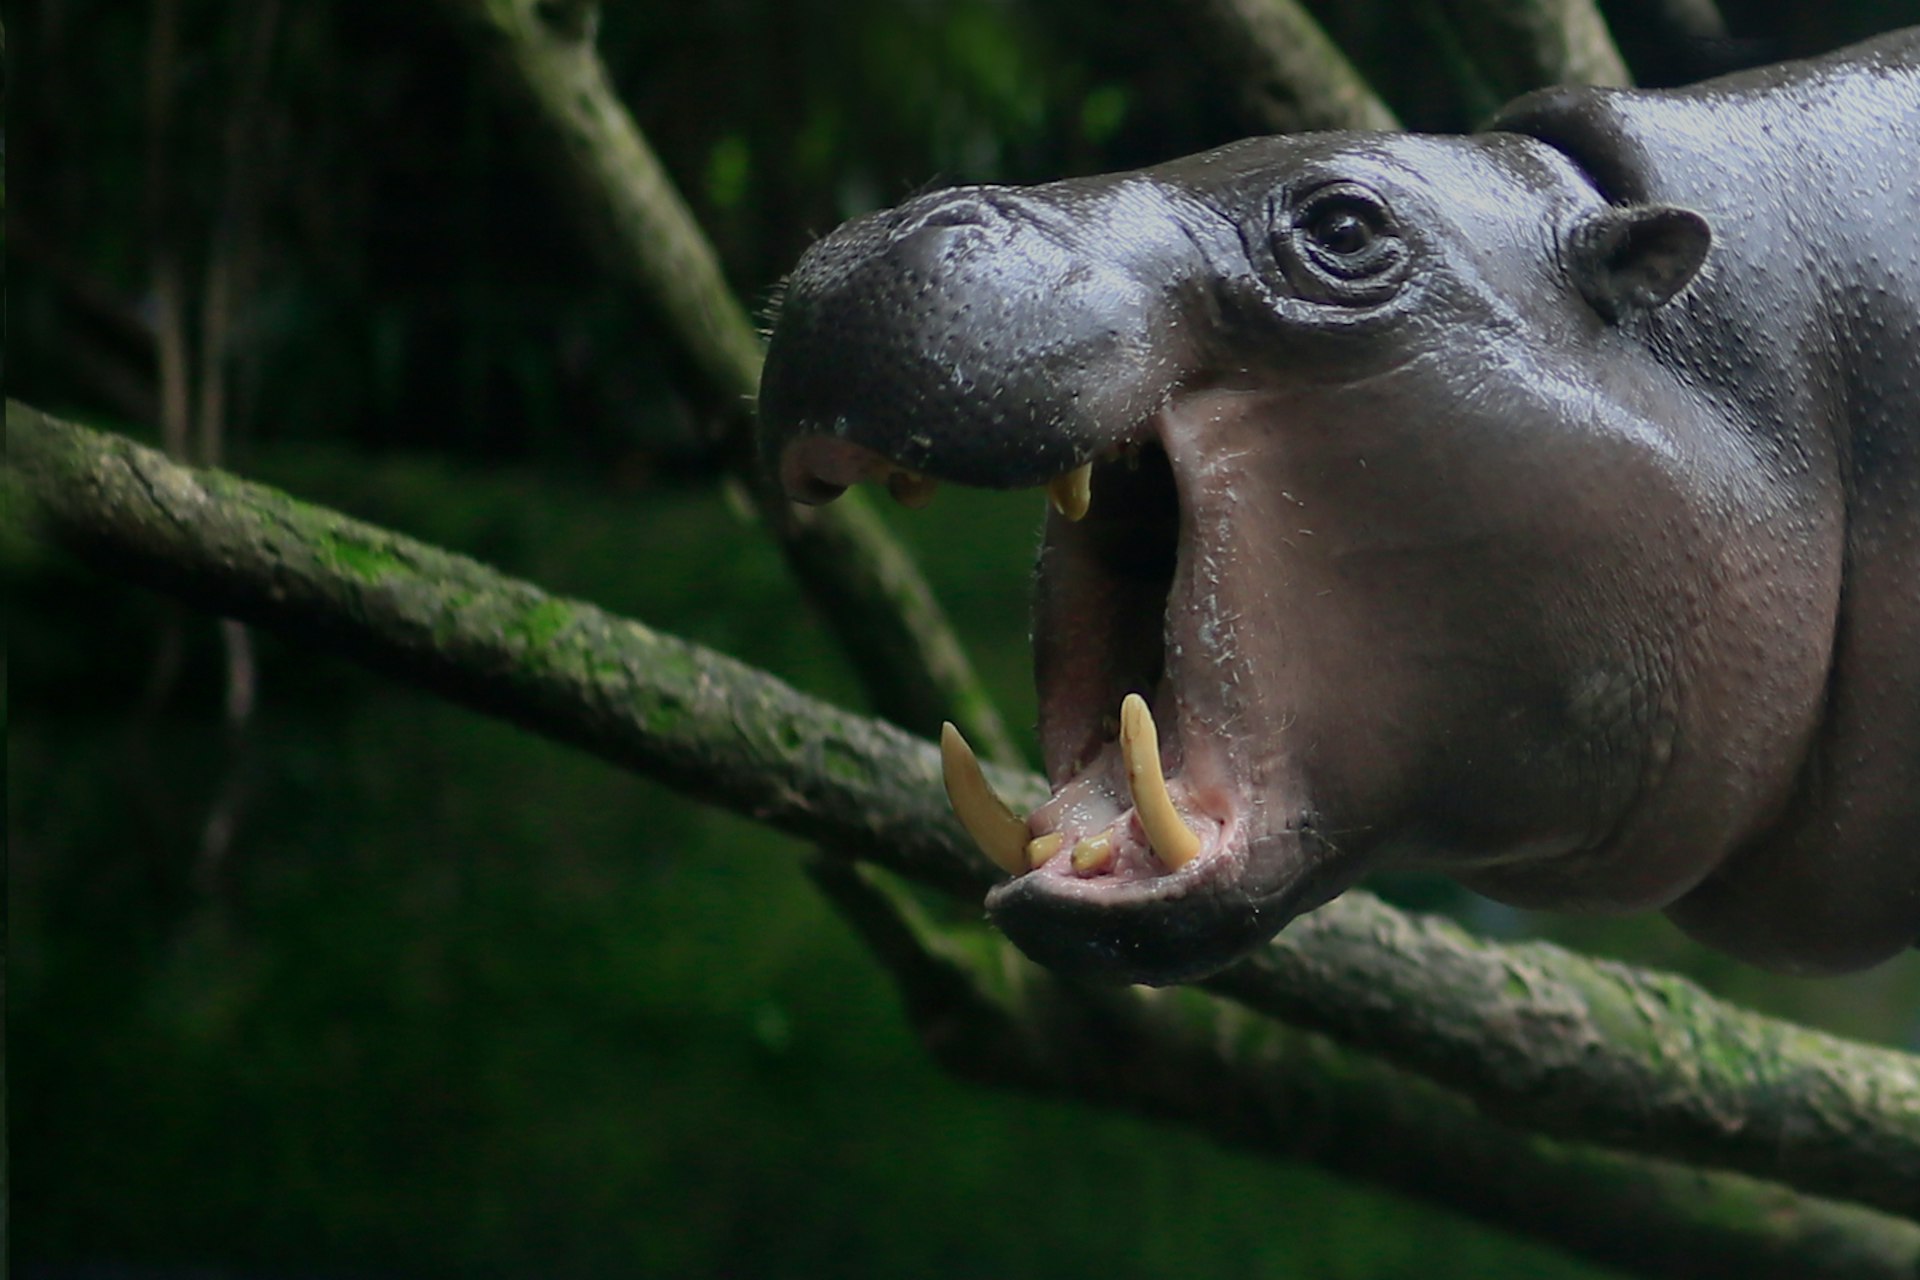 A pygmy hippo's head, with open jaws and large teeth, sticks into the frame of this image from the right side; in the background are fallen trees in a swampy environment